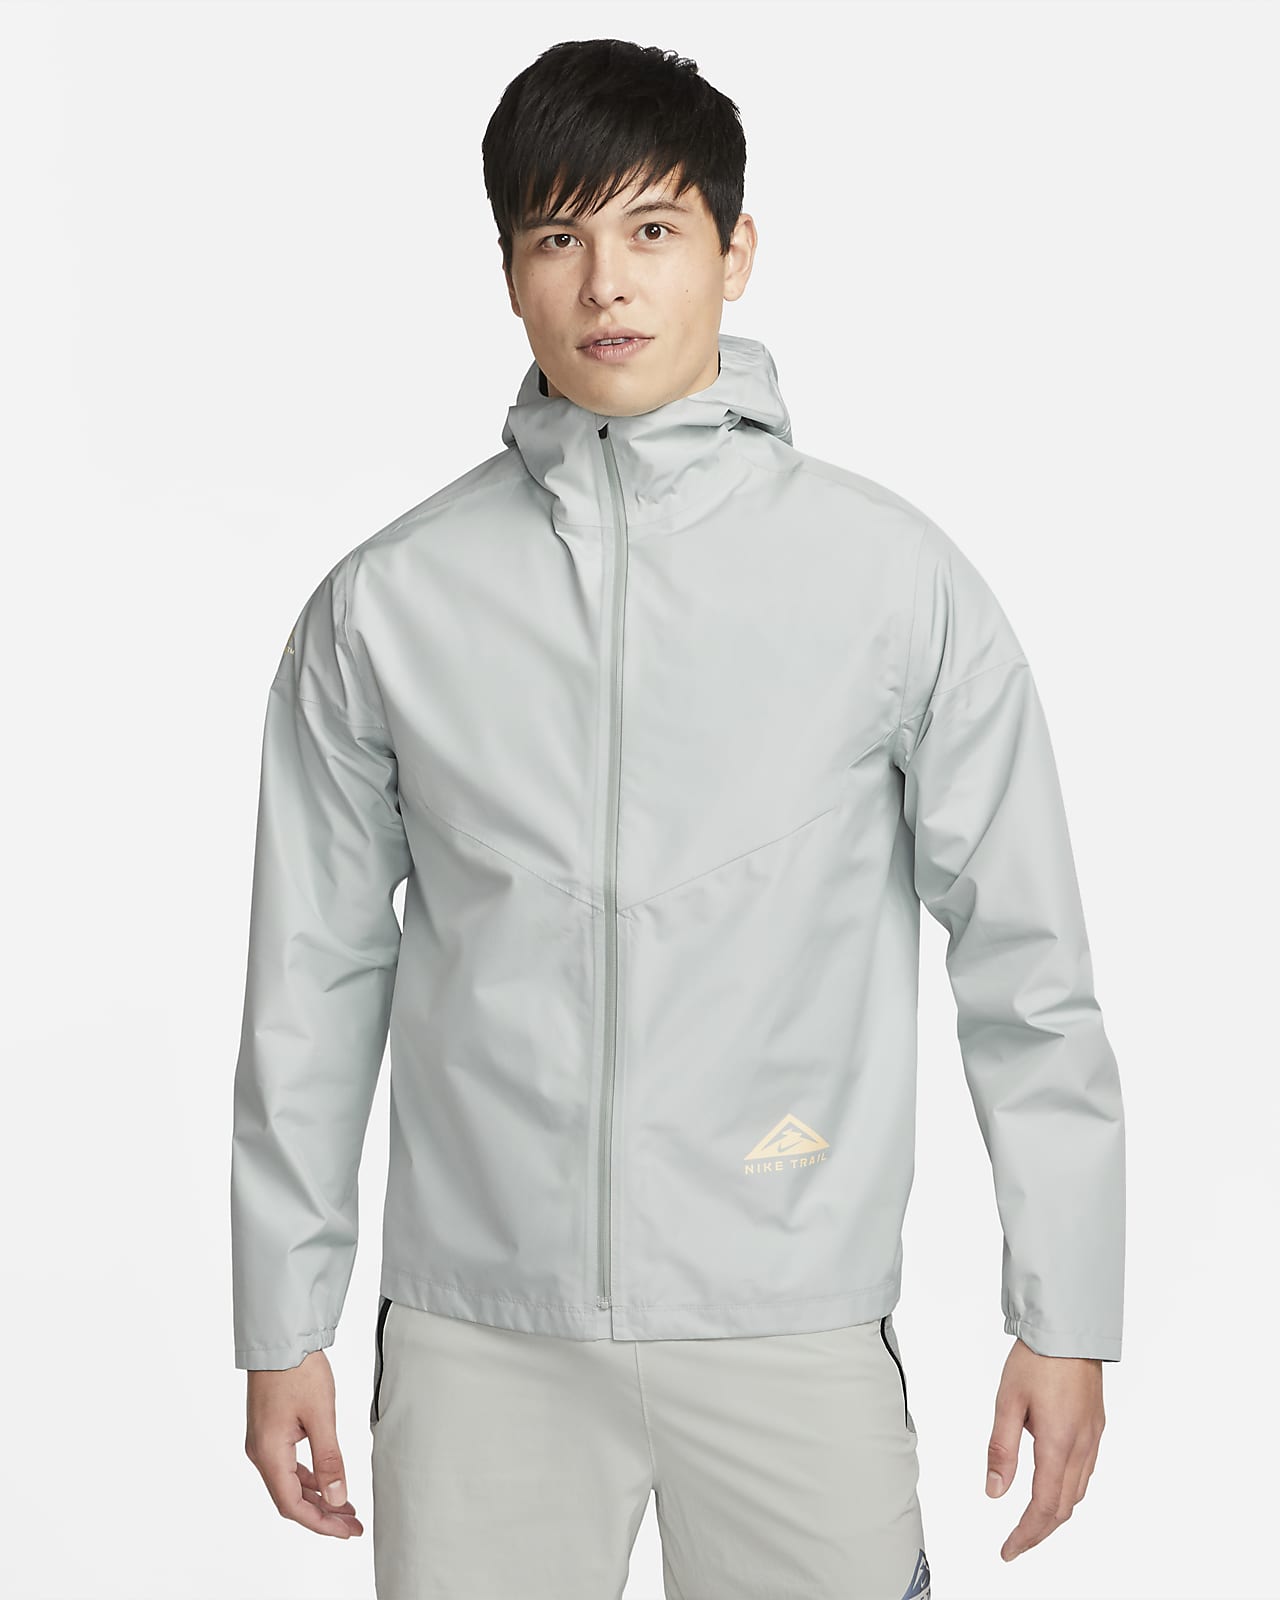 Womens Wet Weather Conditions Recycled Polyester Rain Jackets. Nike.com